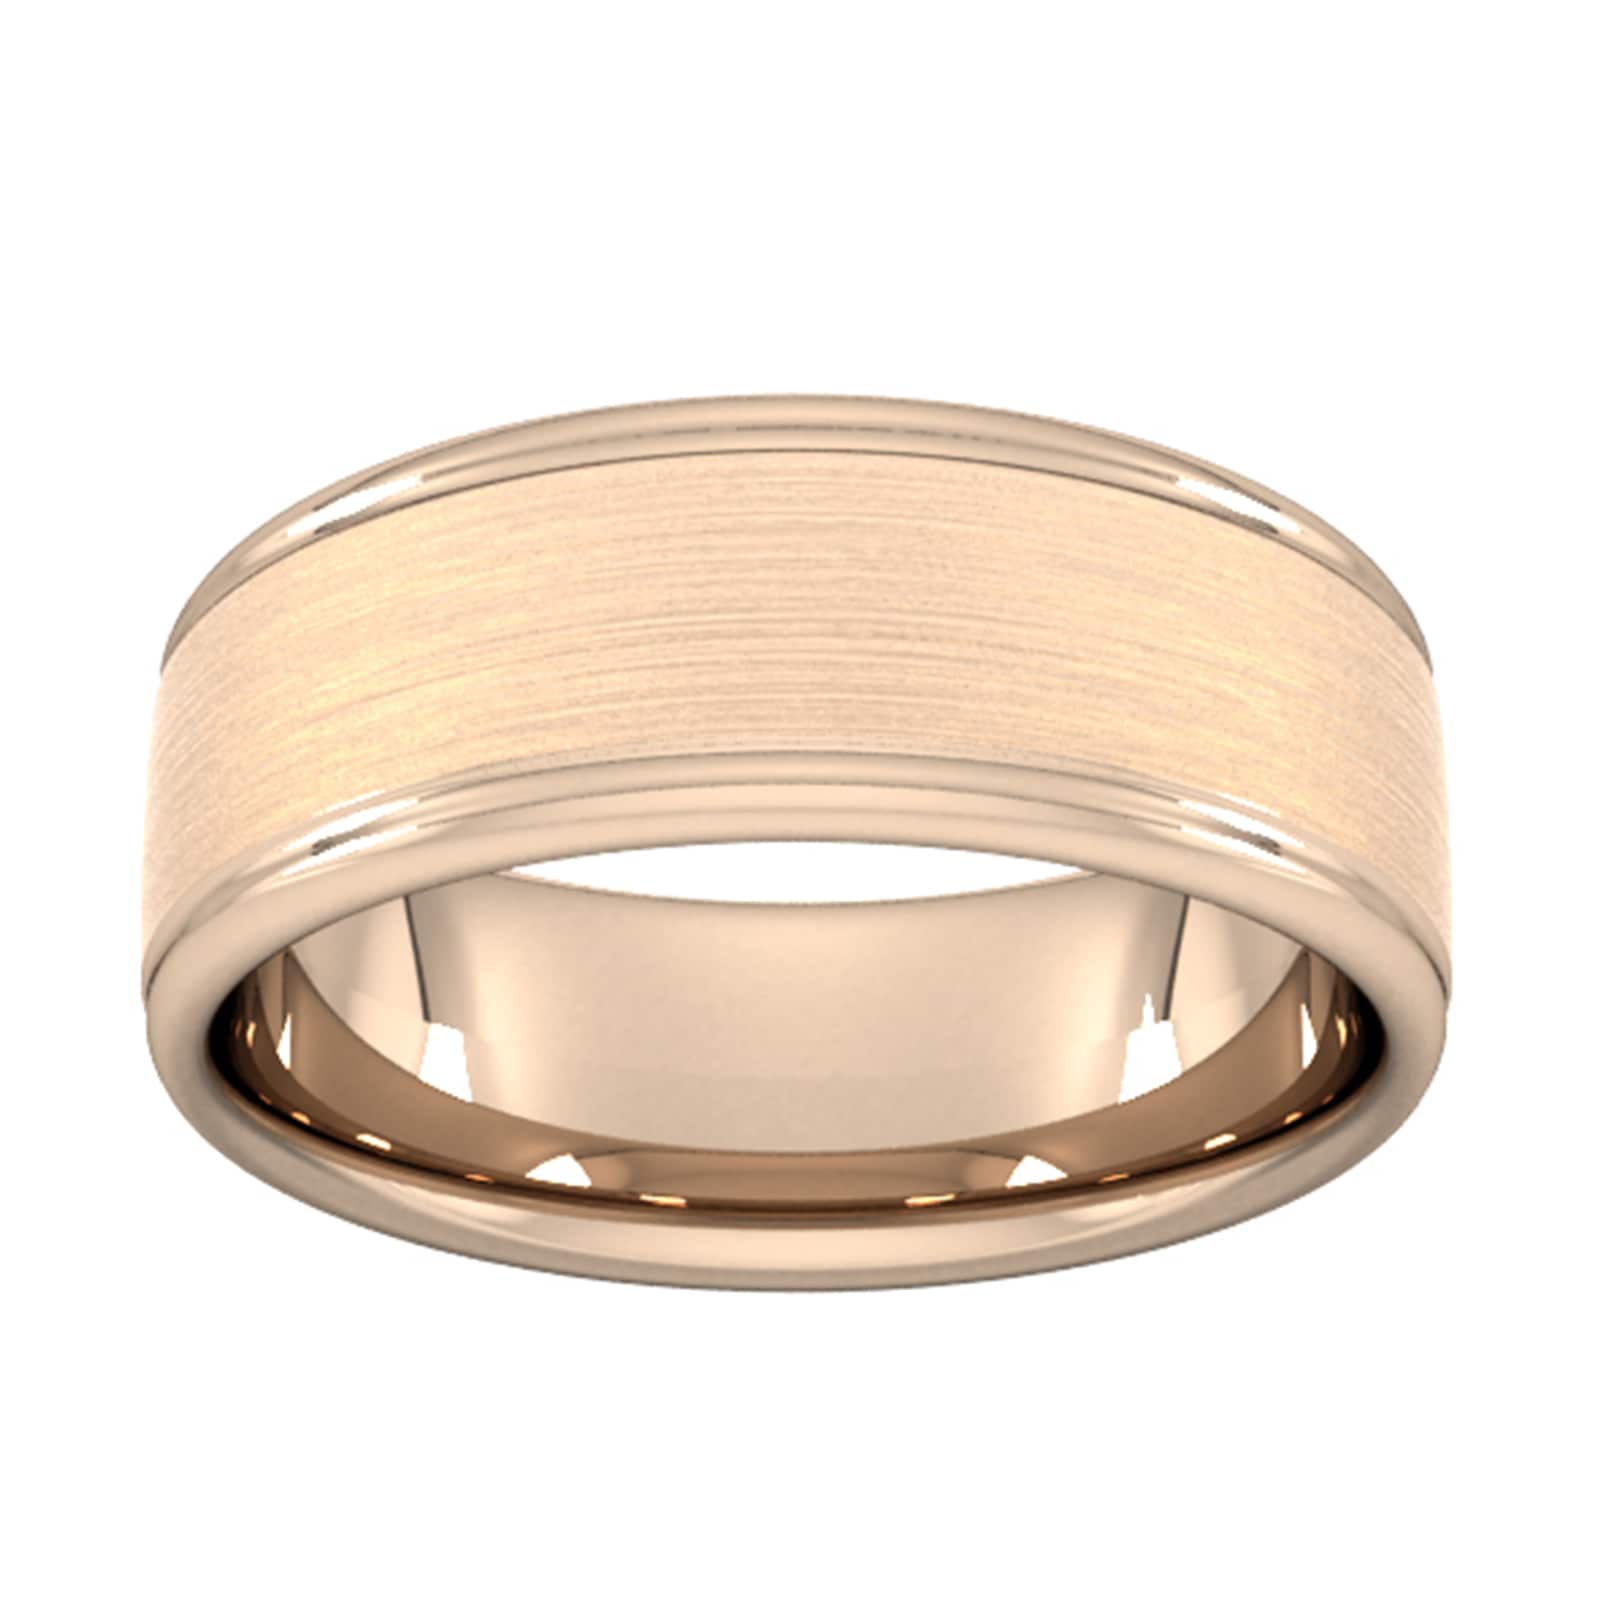 8mm Slight Court Extra Heavy Matt Centre With Grooves Wedding Ring In 18 Carat Rose Gold - Ring Size I